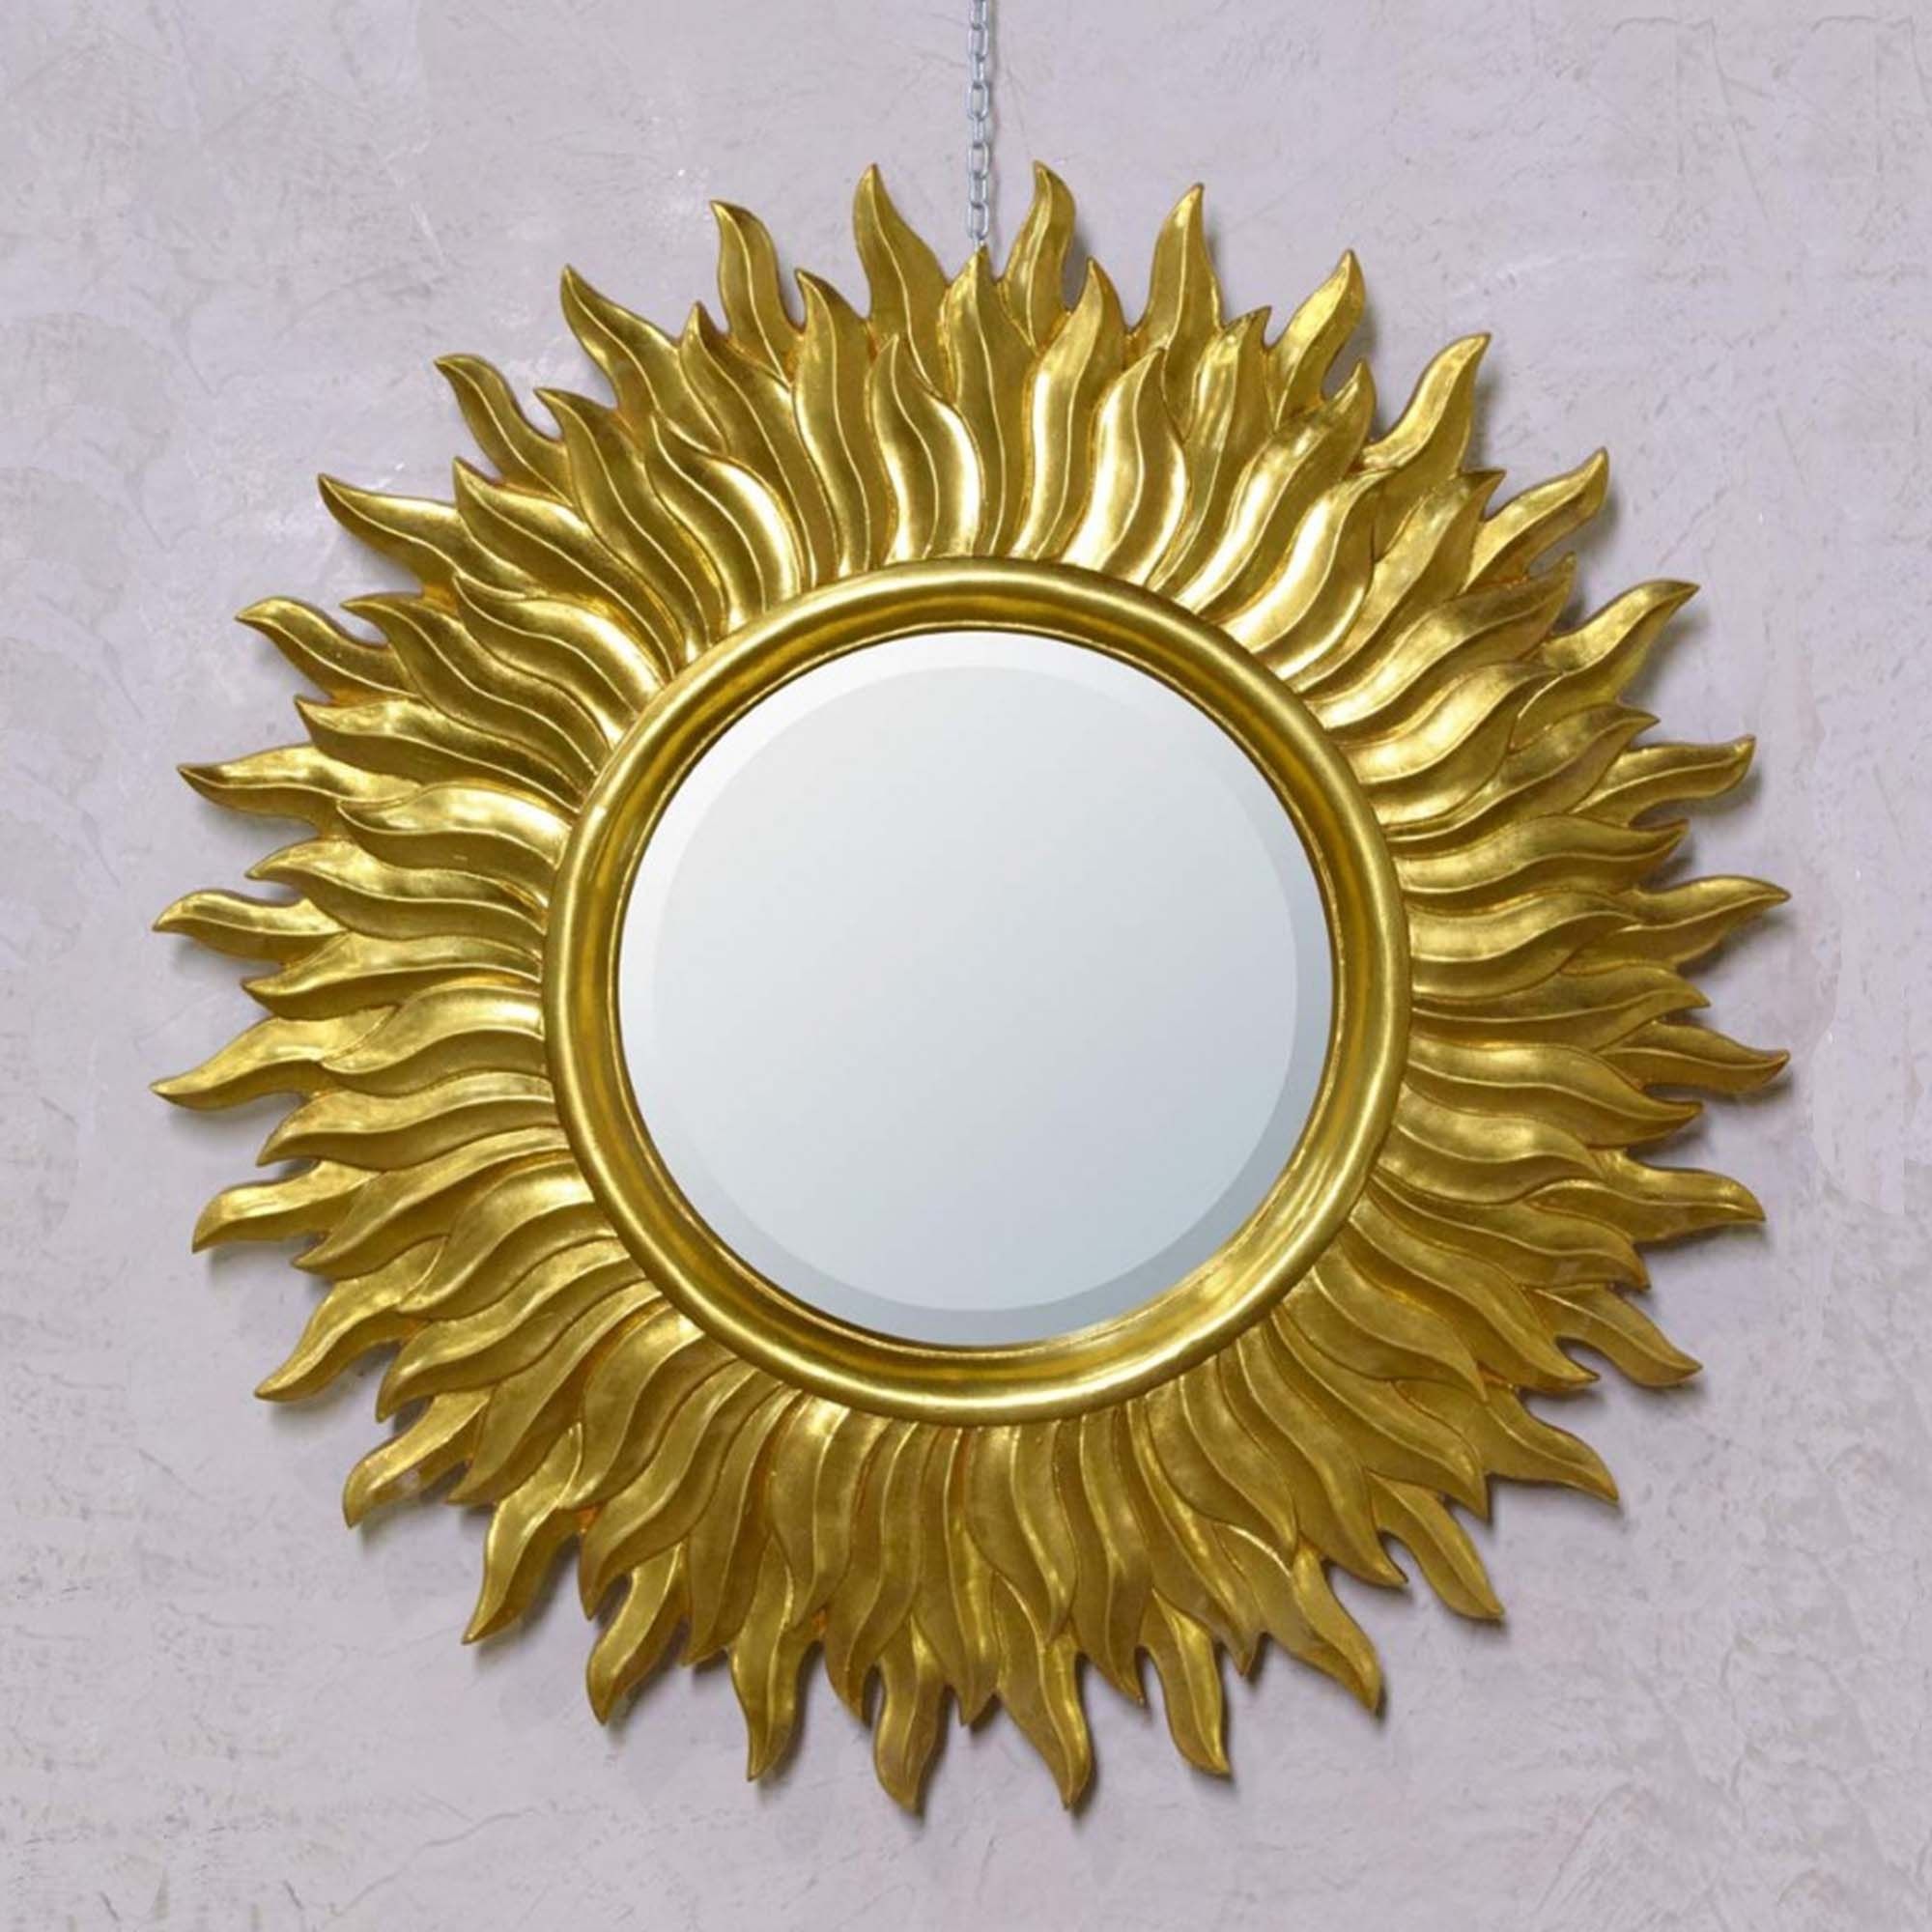 Gold Sunburst Decorative Wall Mirror | Mirror | Homesdirect365 For Most Up To Date Gold Metal Mirrored Wall Art (View 9 of 20)